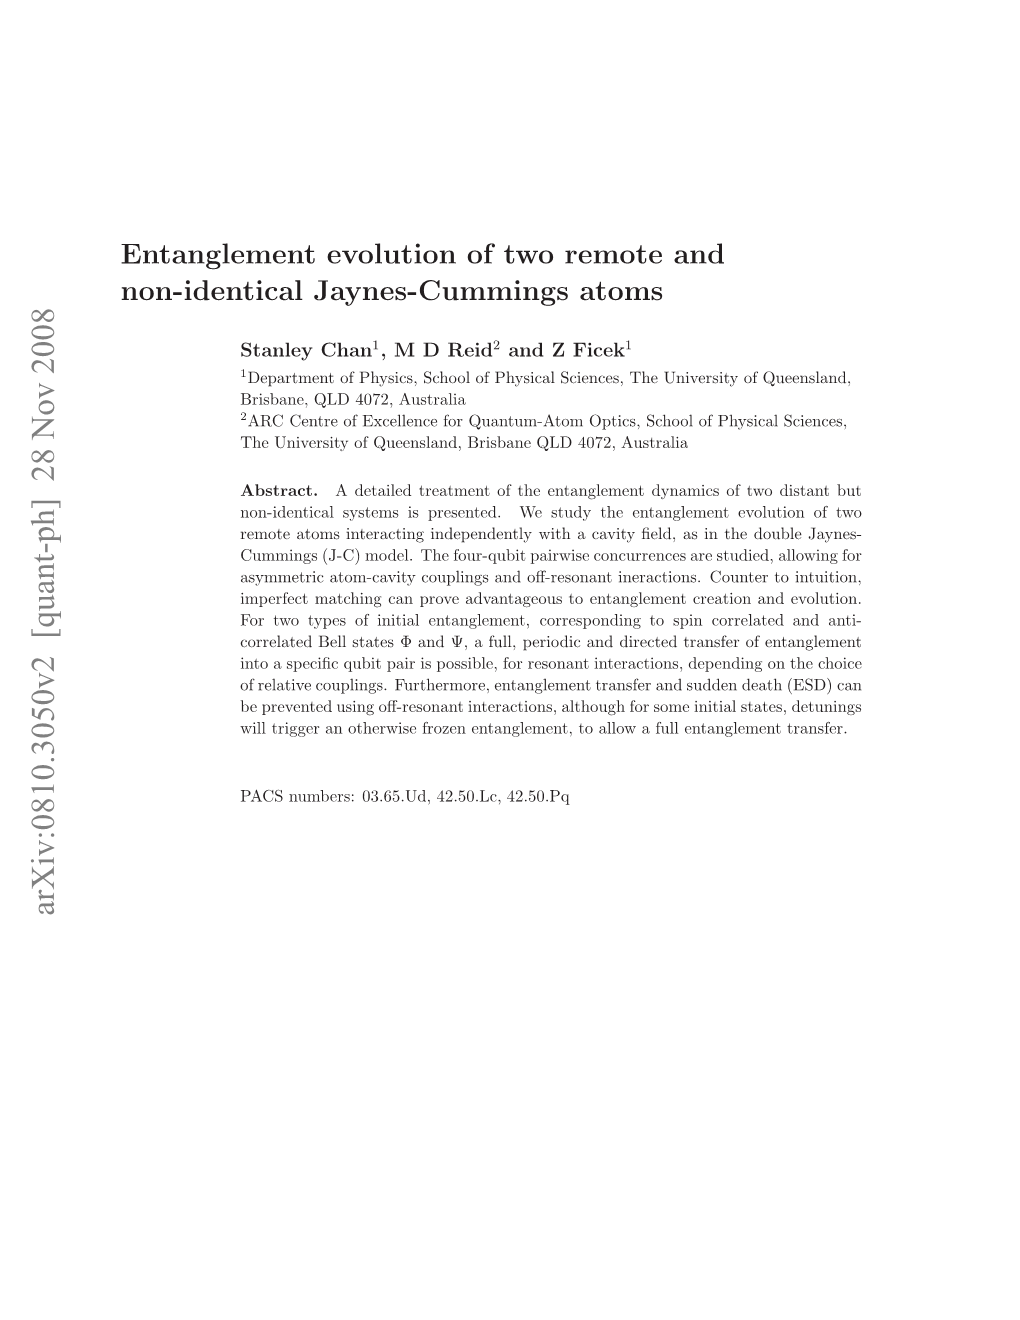 Entanglement Evolution of Two Remote and Non-Identical Jaynes-Cummings Atoms 2